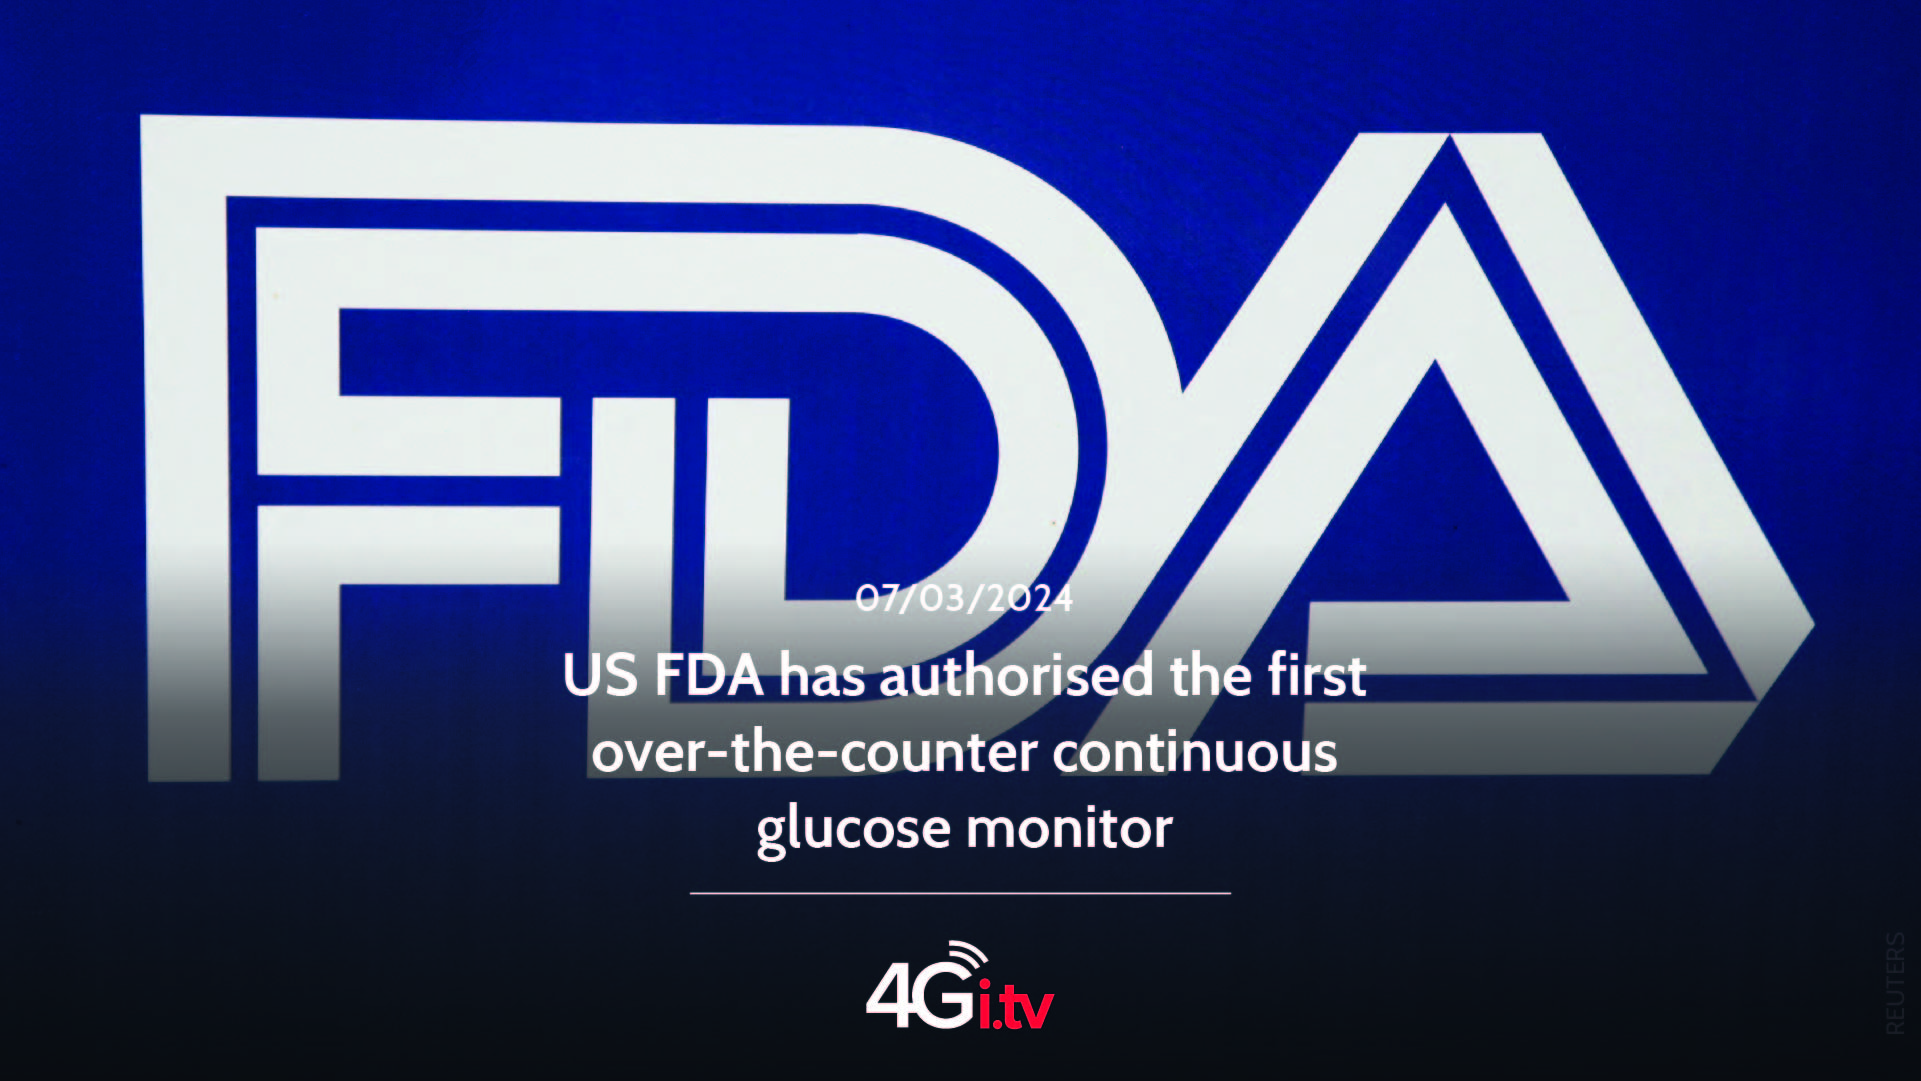 Lesen Sie mehr über den Artikel US FDA has authorised the first over-the-counter continuous glucose monitor